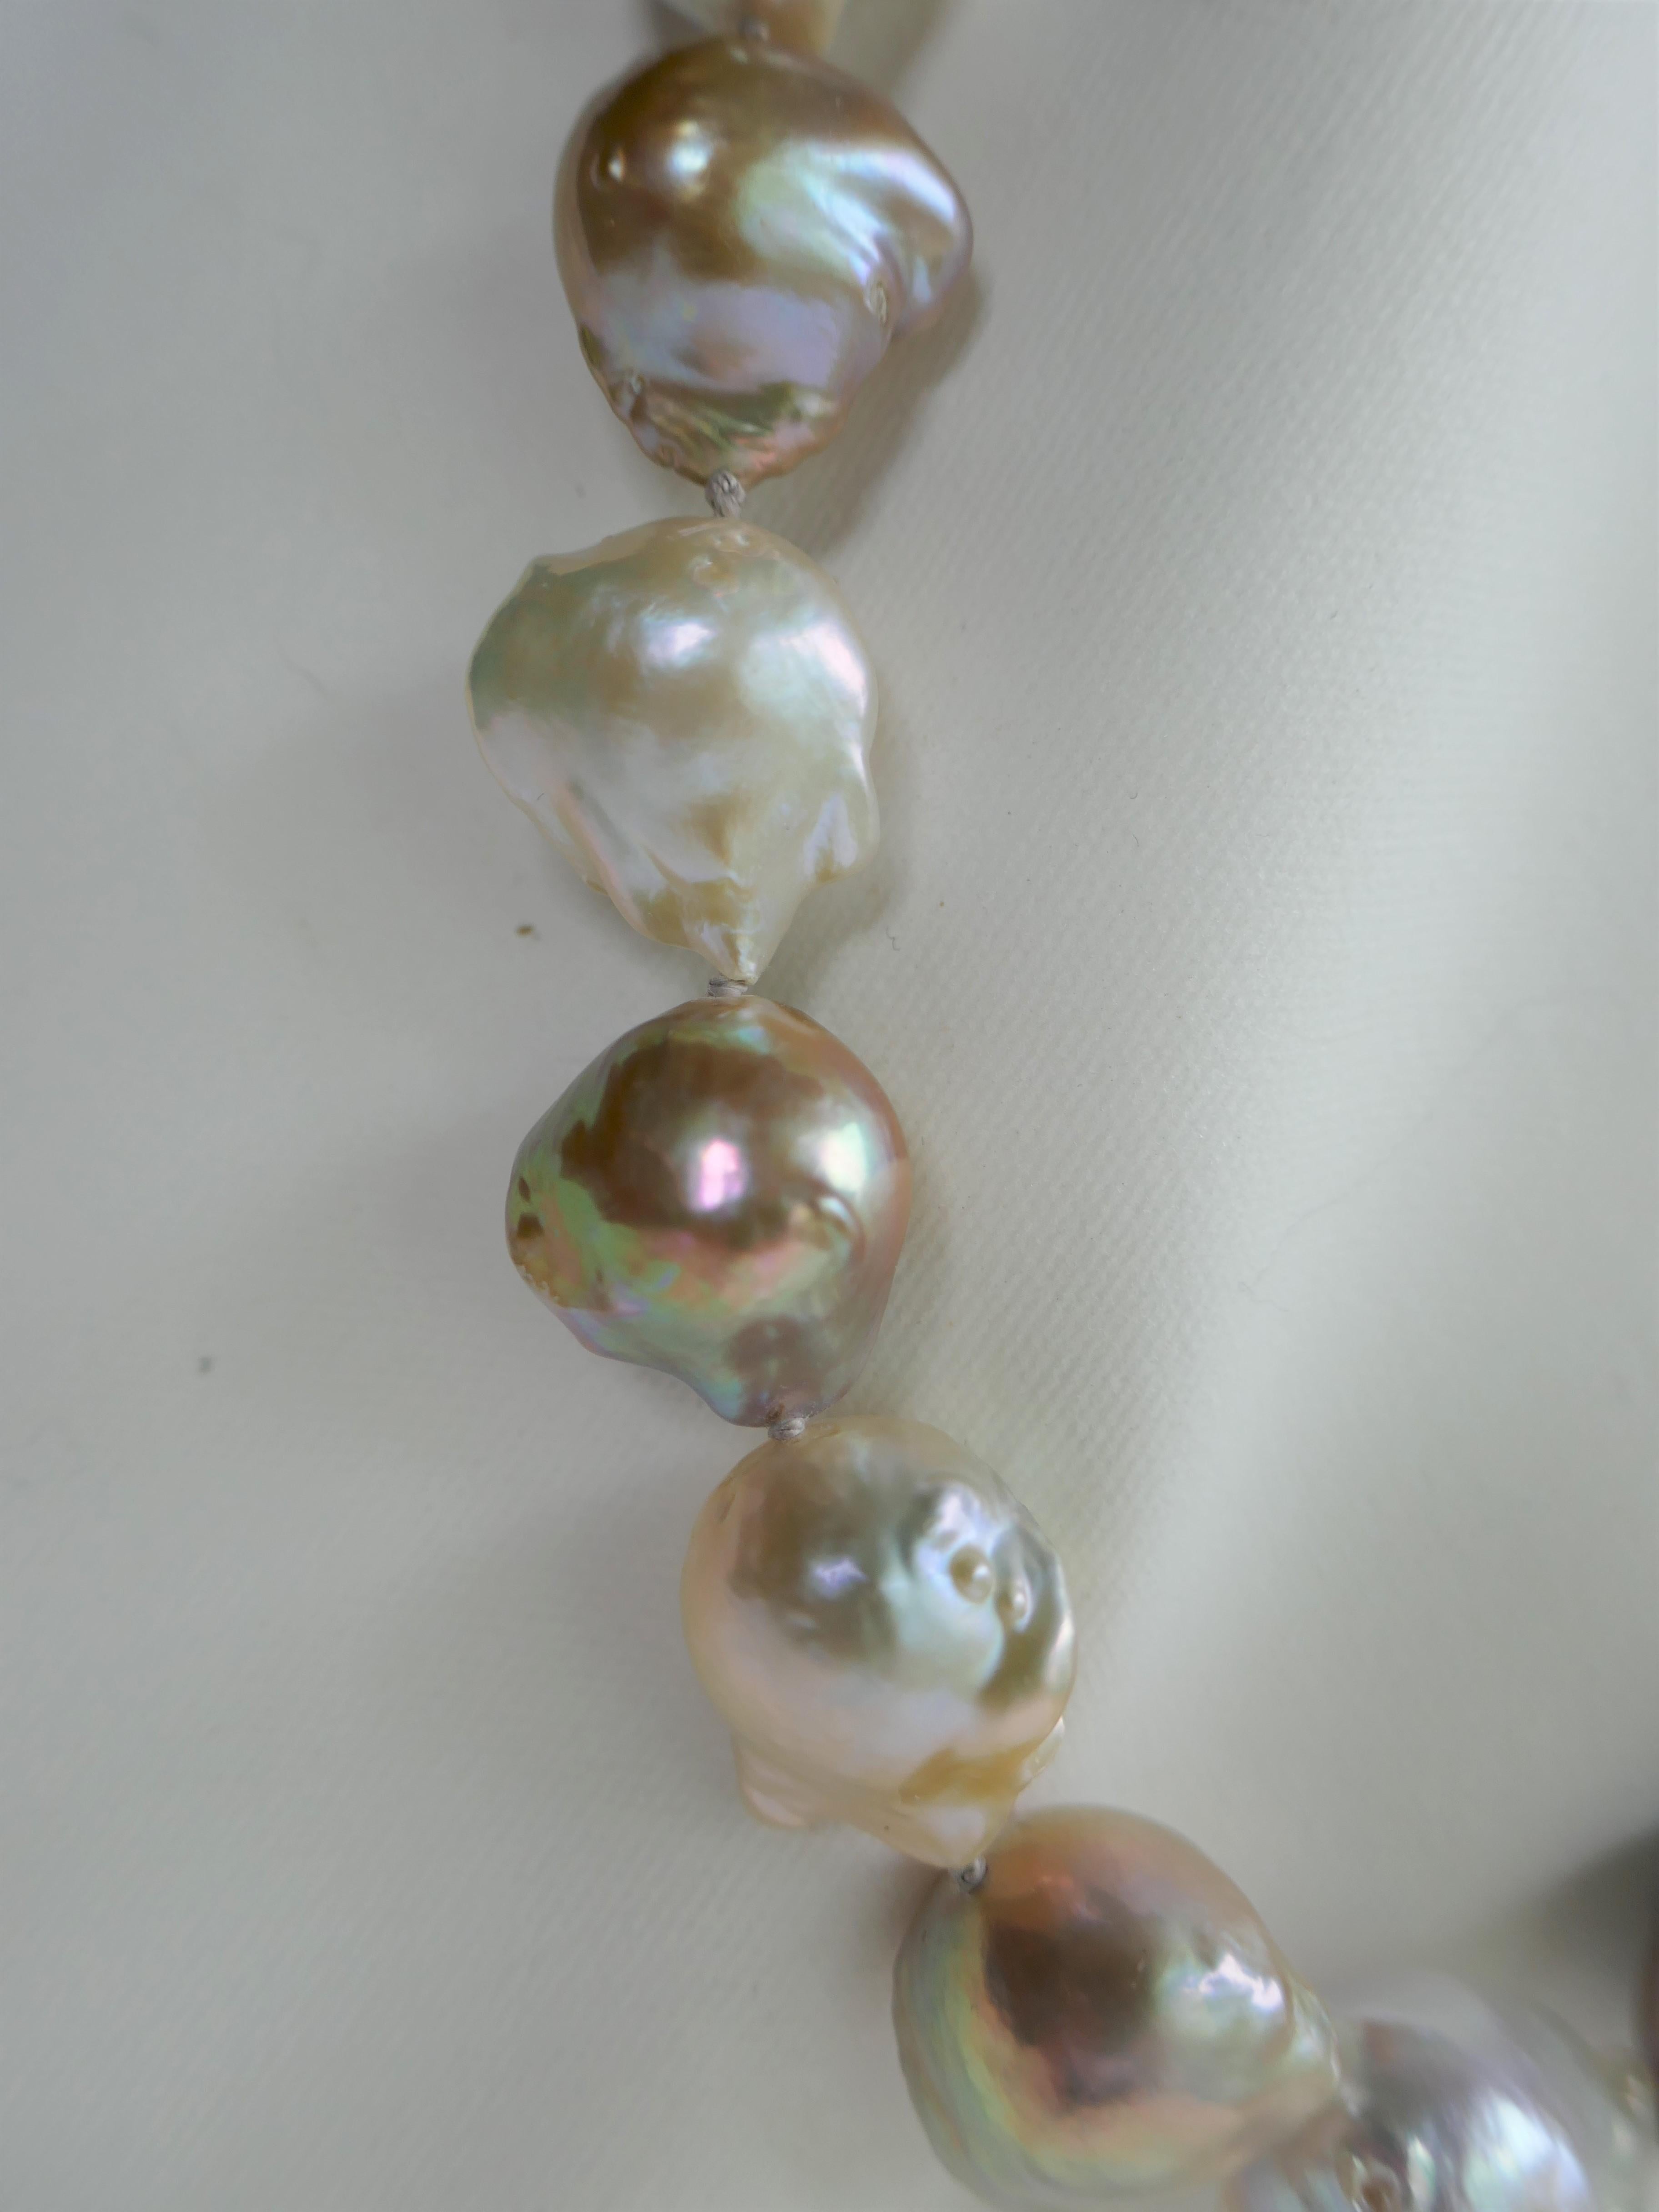 This natural color baroque cultured pearl necklace is absolutely beautiful. This is a statement necklace. The baroque cultured pearls are natural tones with golden, white, beige tonality. The pearls have great luster.  The necklace is individually